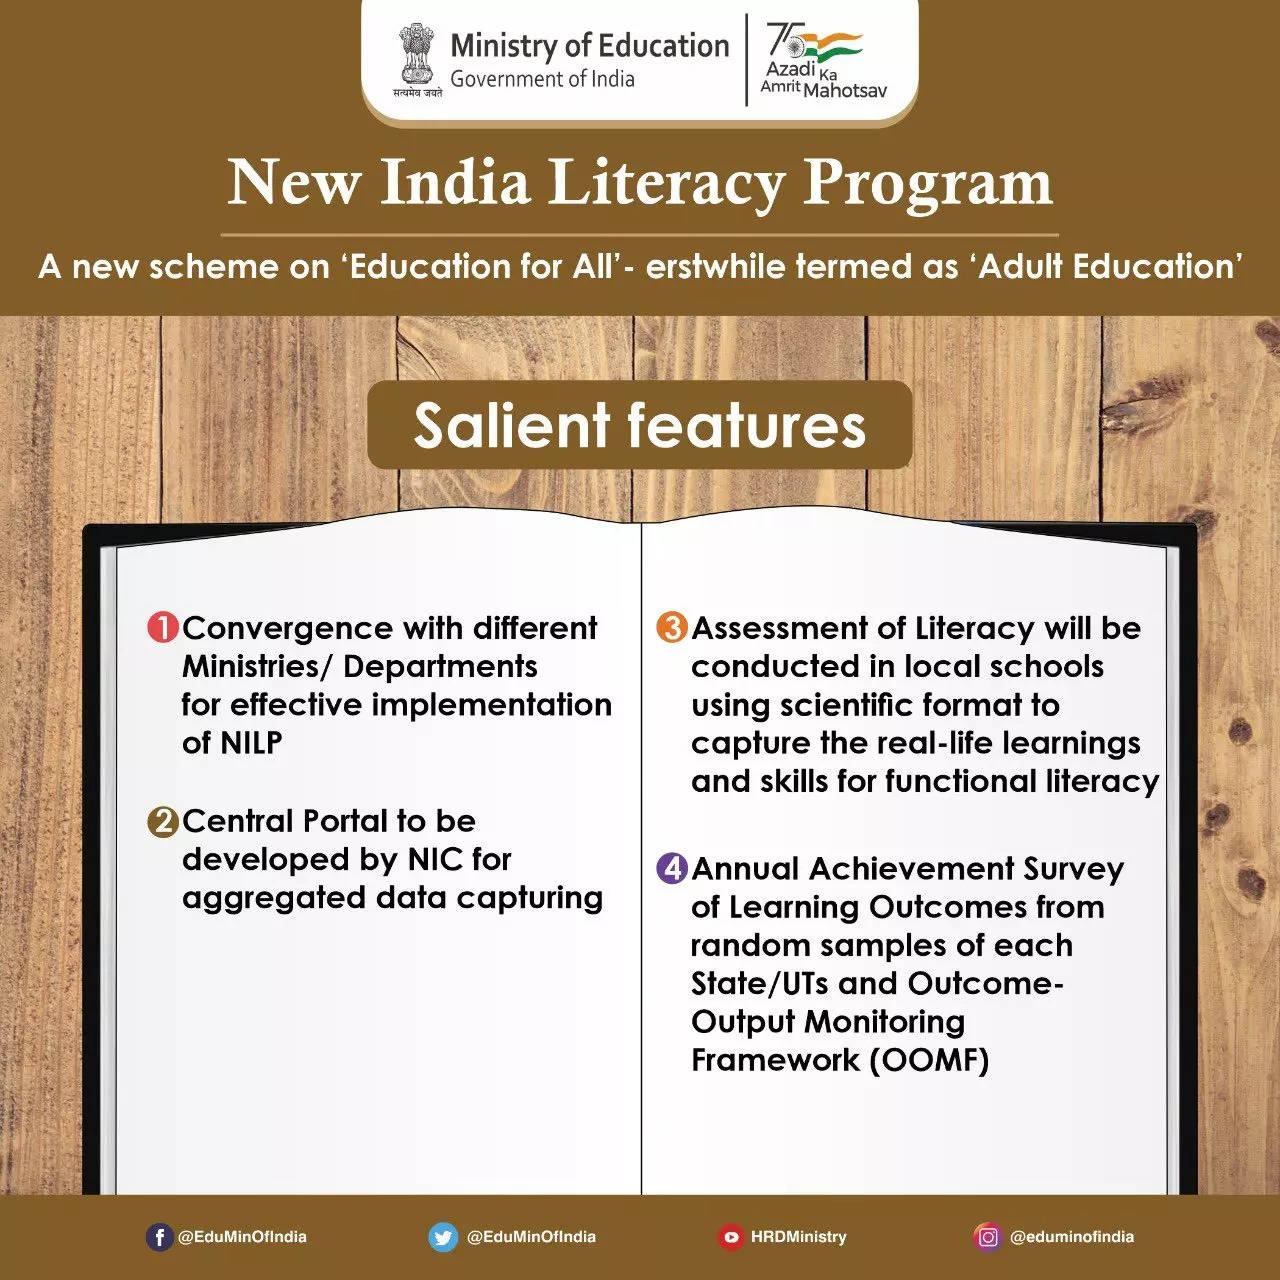 New India Literacy Programme launched to cover target of 5 crore non-literates in age group of 15 years and above_50.1